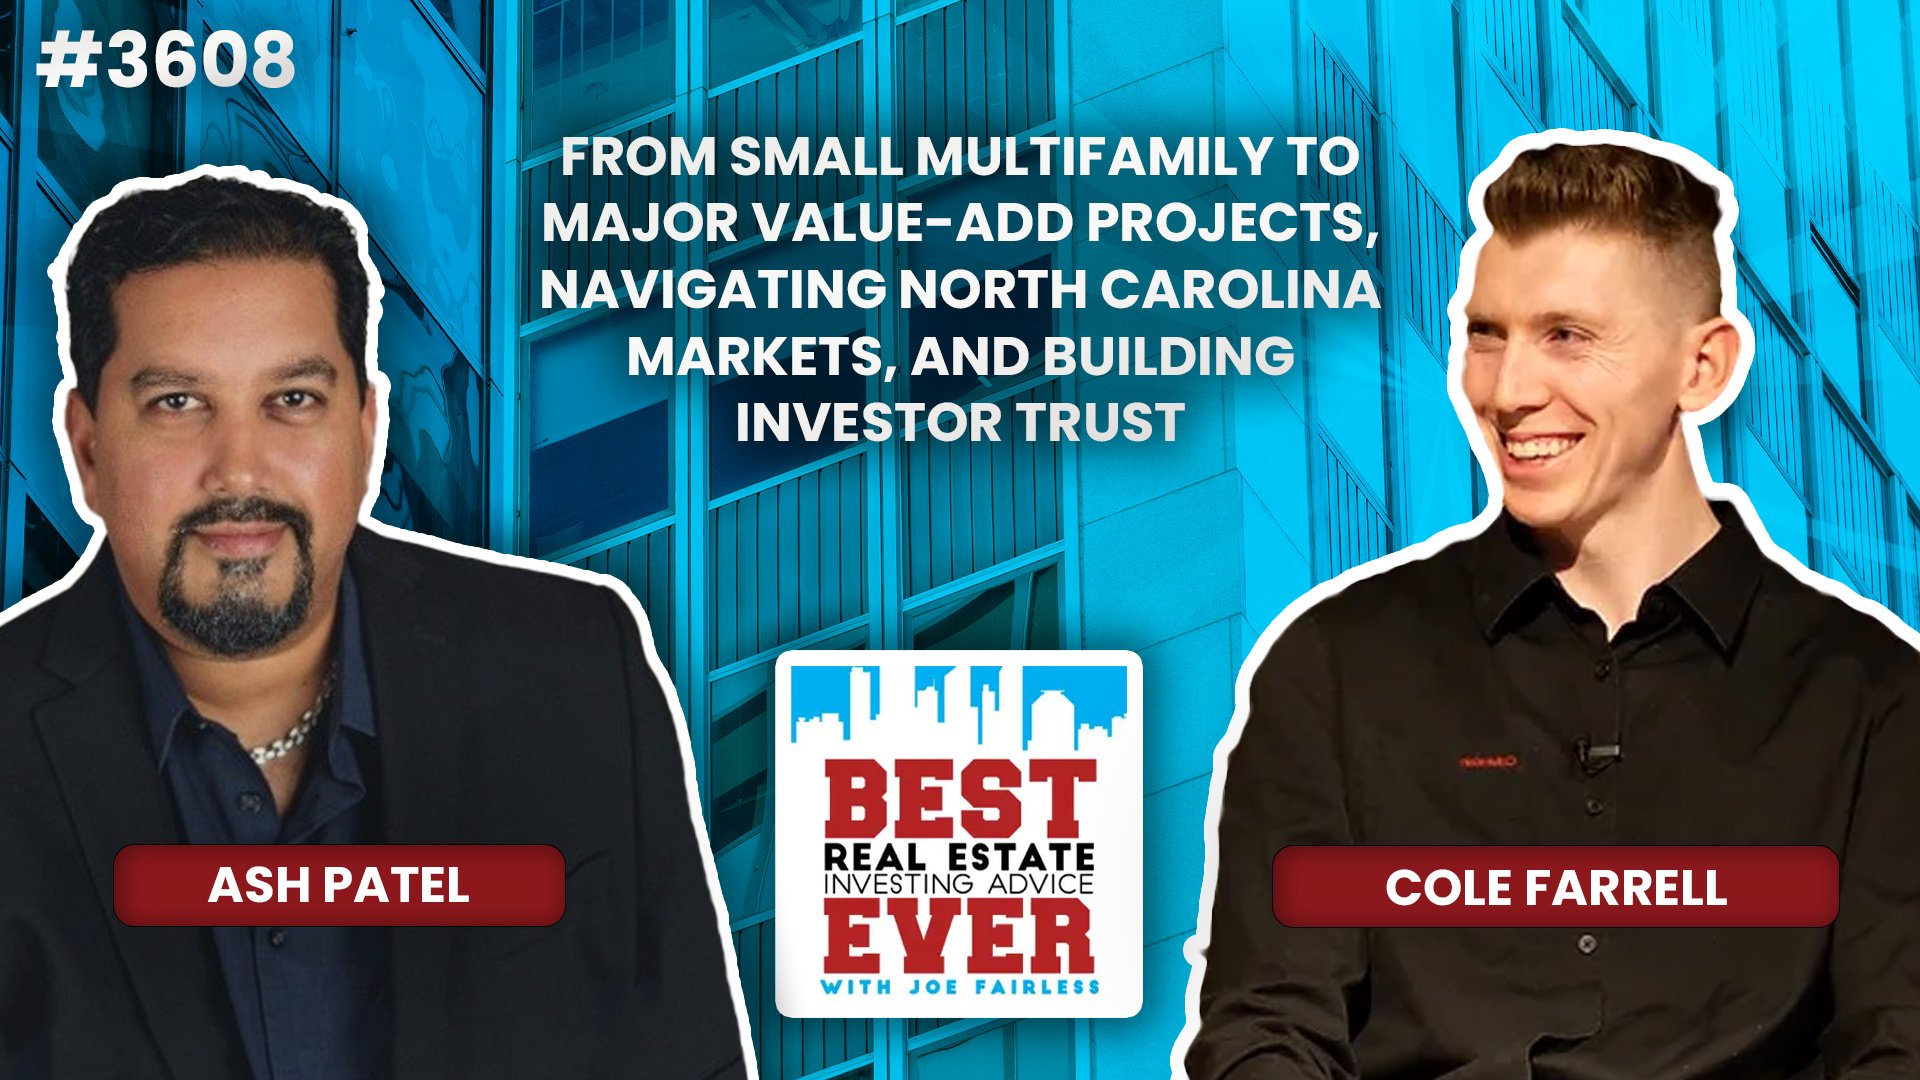 JF3608: From Small Multifamily to Major Value-Add Projects, Navigating North Carolina Markets, and Building Investor Trust ft. Cole Farrell